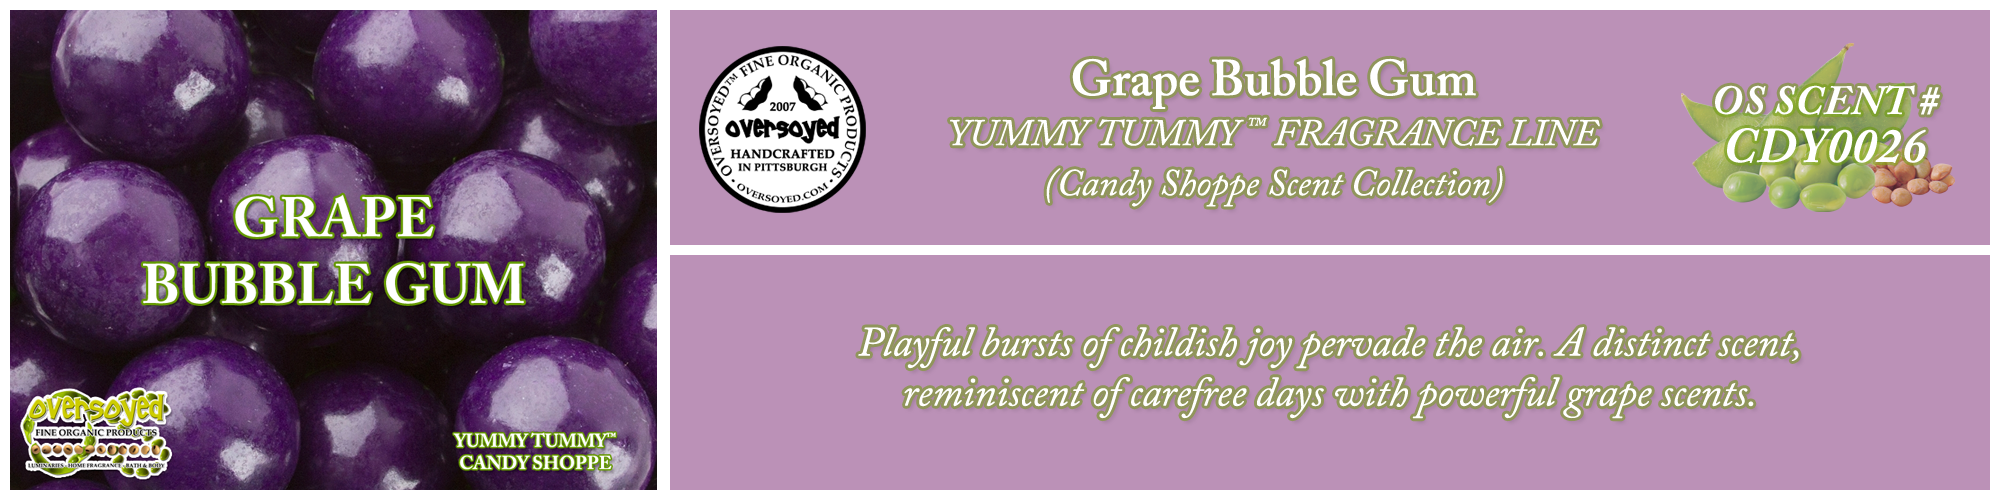 Grape Bubble Gum Handcrafted Products Collection